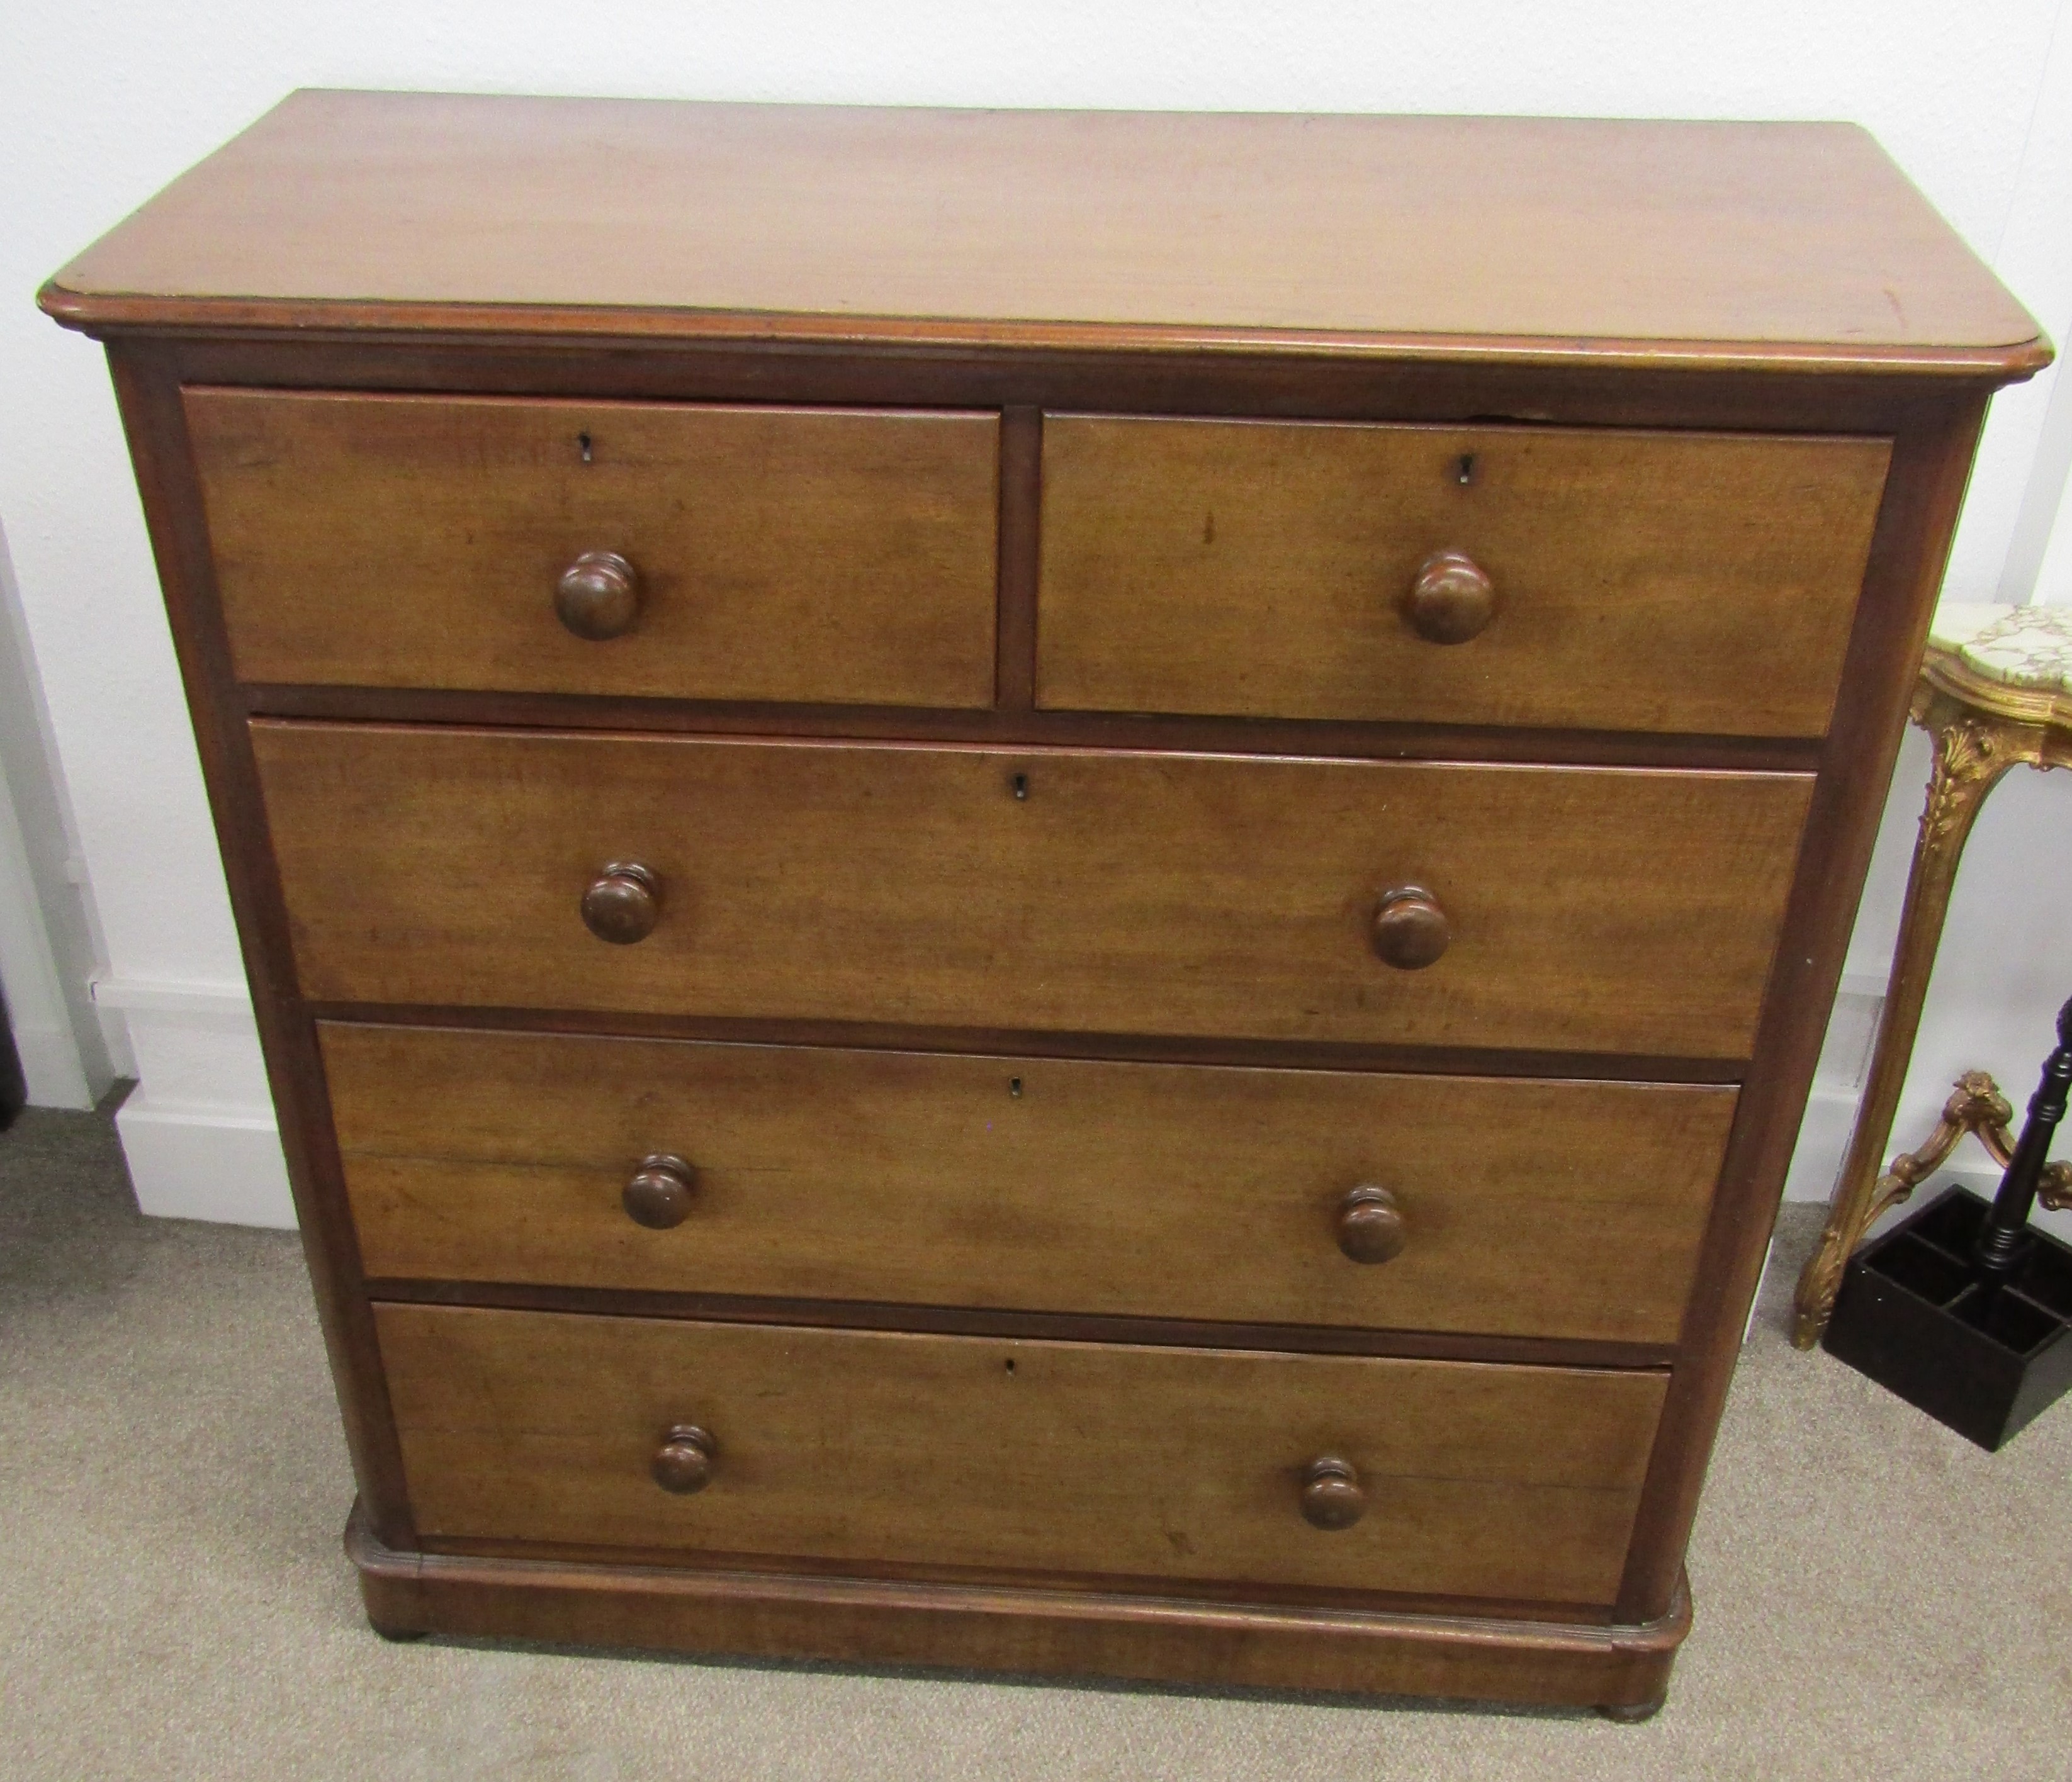 Large Victorian mahogany chest of drawers - approx. 120cm x 52.5cm x 119.5cm - Image 2 of 4